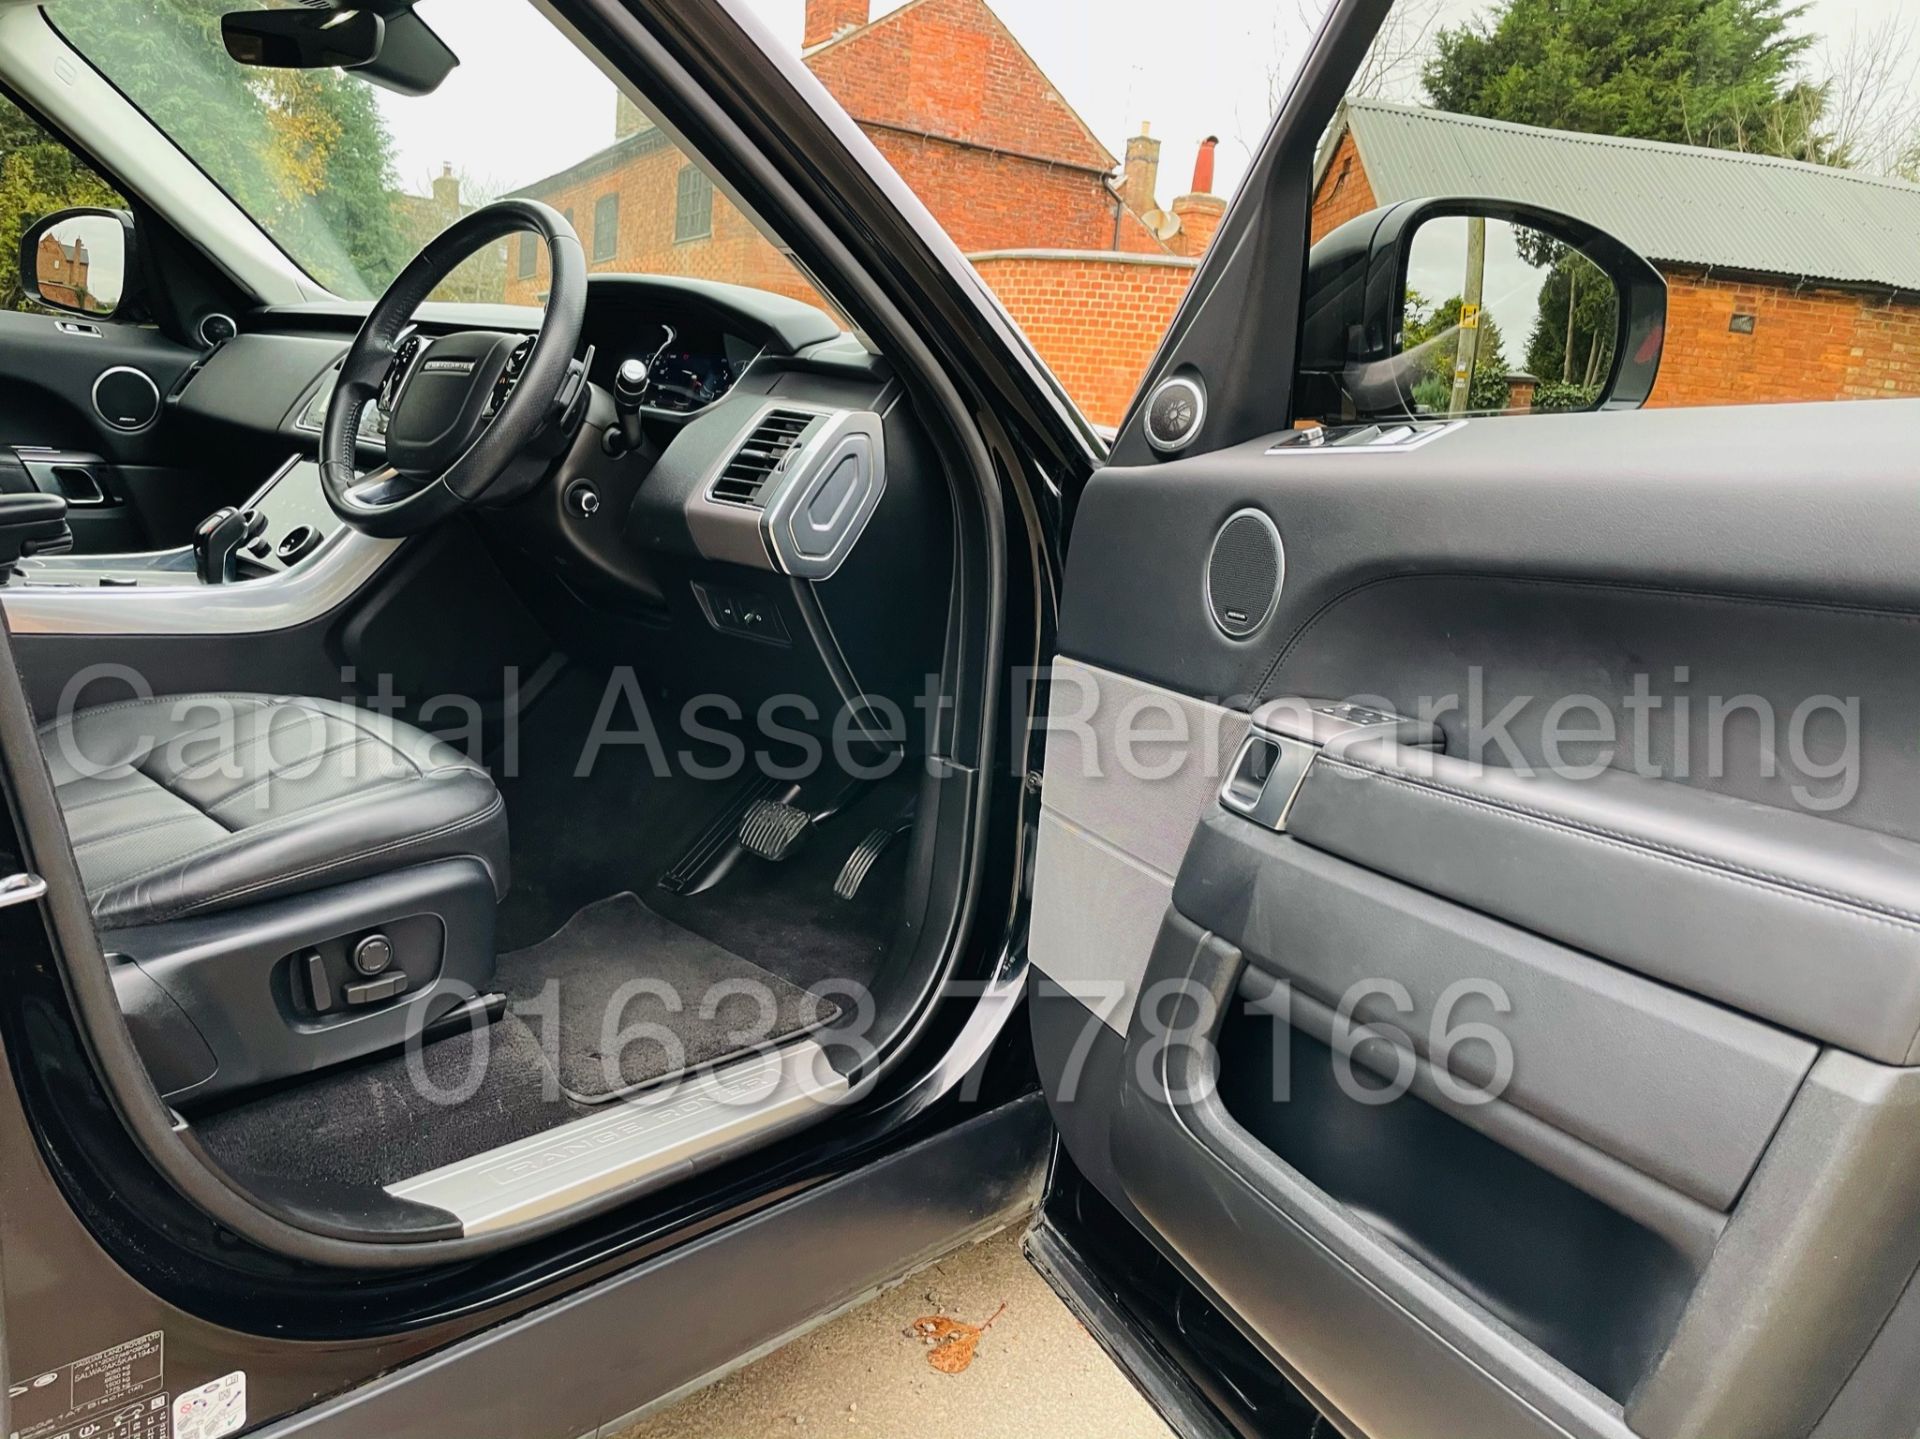 RANGE ROVER SPORT *HSE EDITION* SUV (2019 MODEL) '3.0 SDV6 - 306 BHP - 8 SPEED AUTO' *FULLY LOADED* - Image 36 of 56